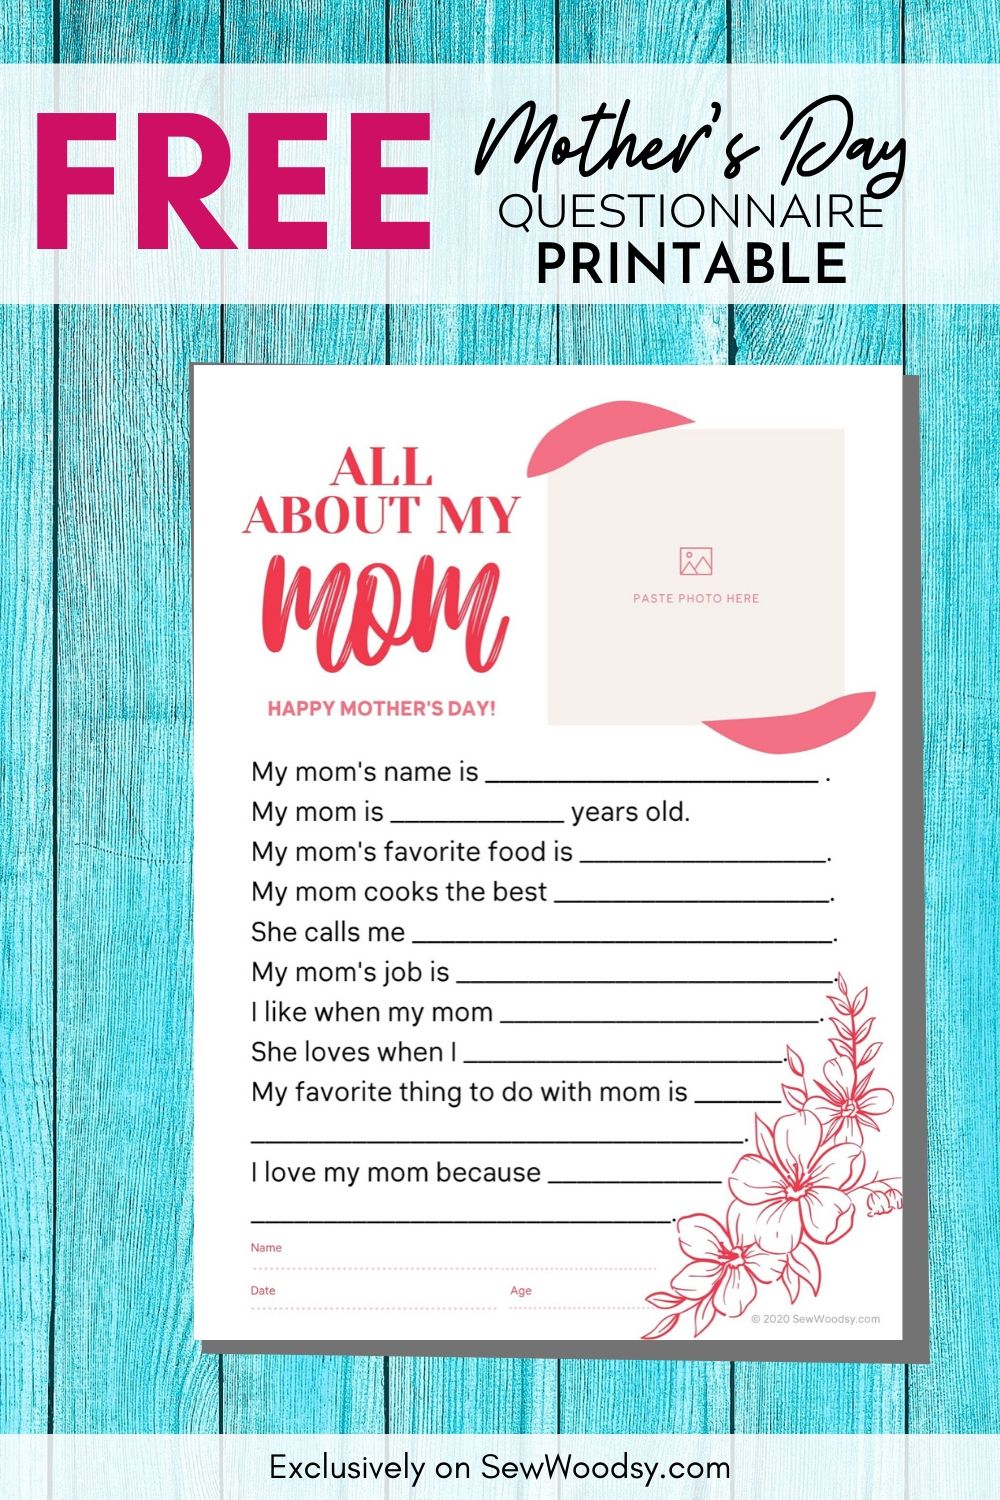 Free Mother's Day Questionnaire Printable preview with text